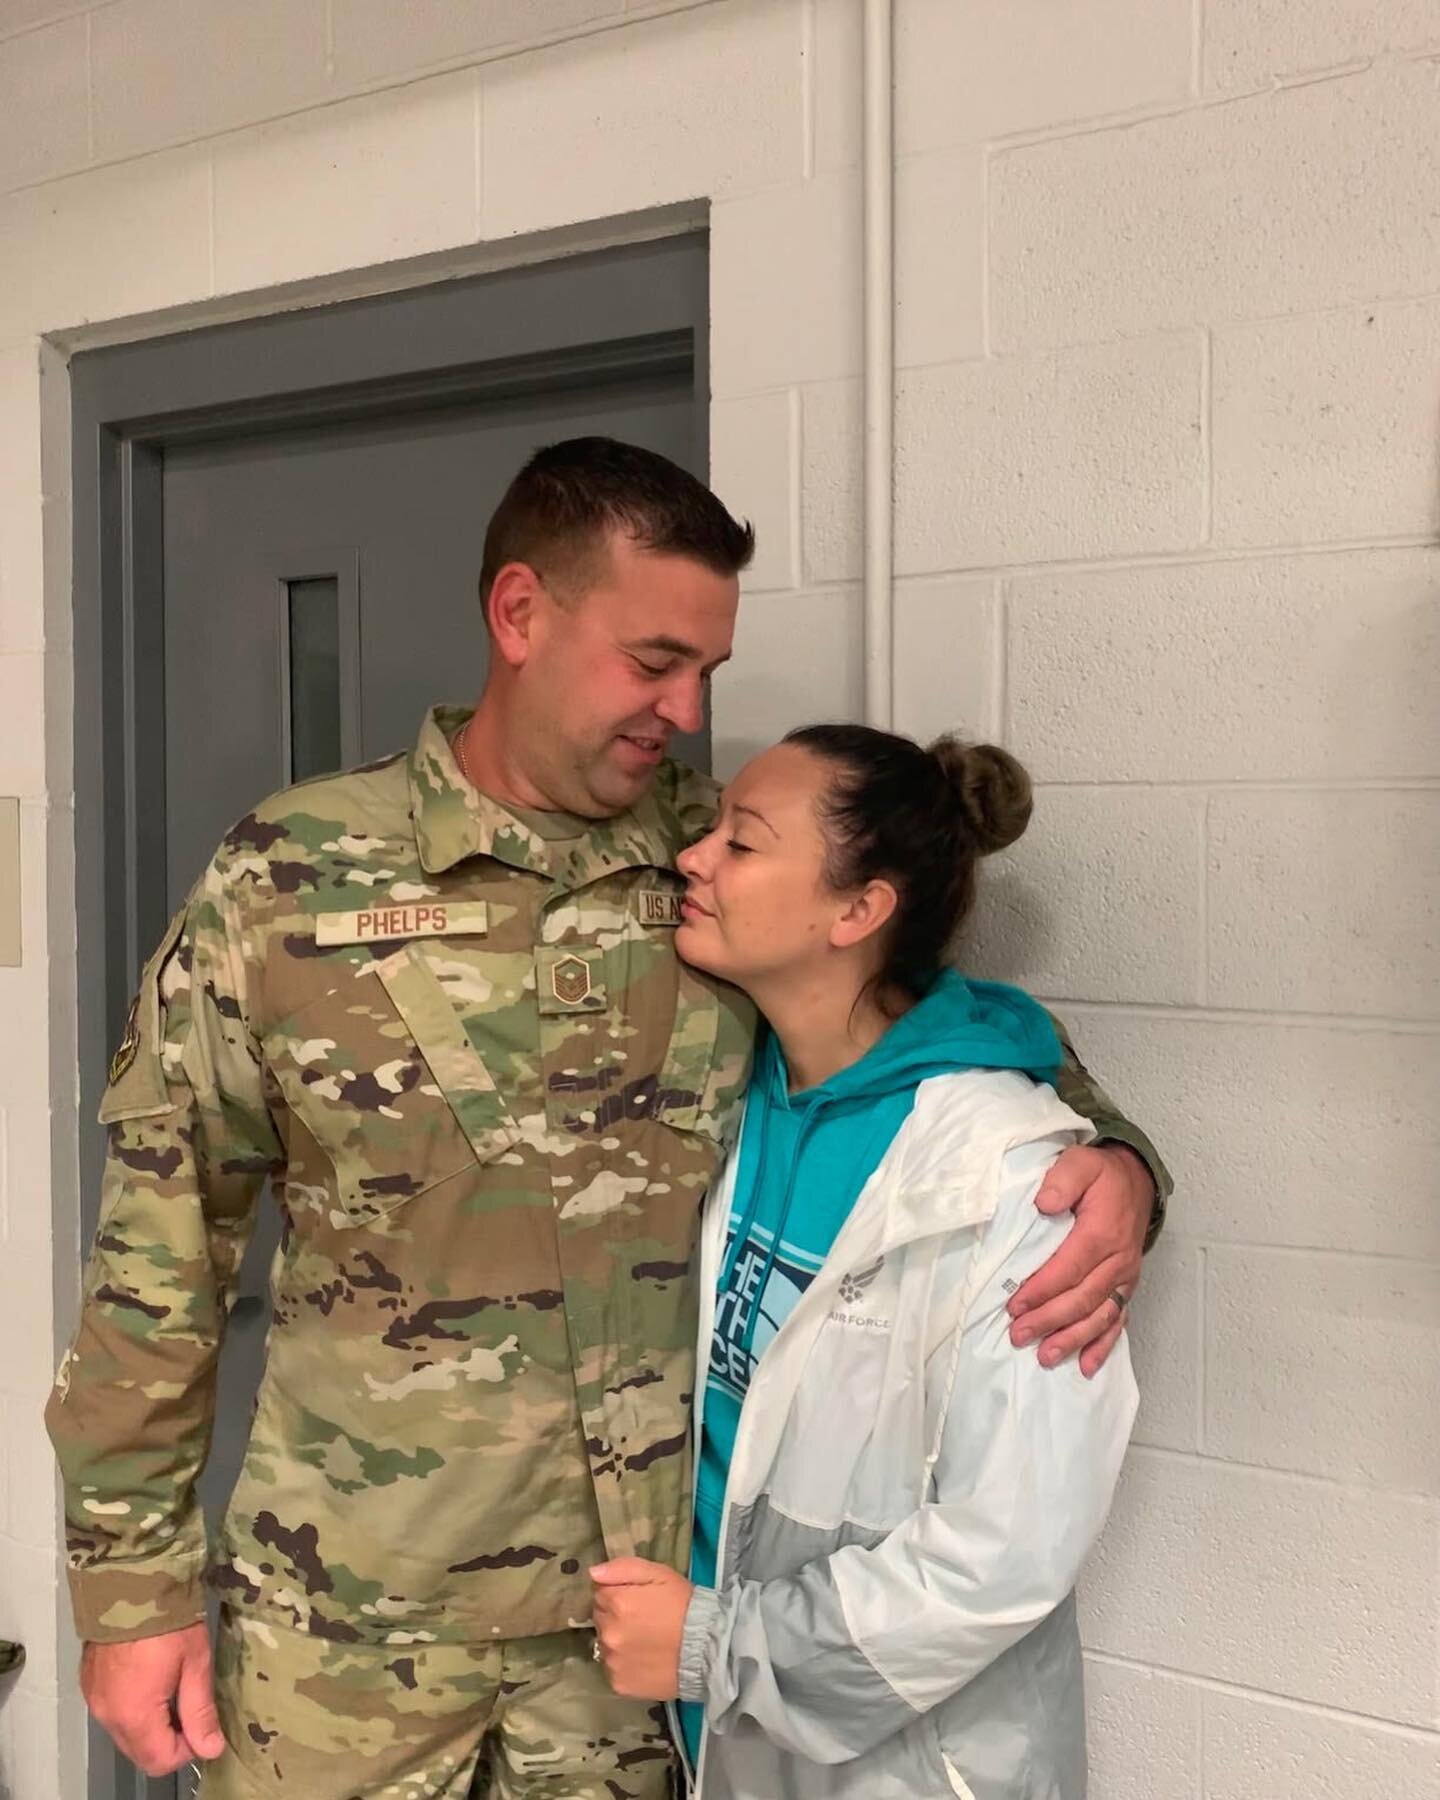 From a recipient Christmas 2020: 
⠀⠀⠀⠀⠀⠀⠀⠀⠀
&ldquo;Yes, every ounce of pain seen in my face was in my heart. The hardest thing I&rsquo;ve been through. I never realized how strong these military families are, until this day. To the service men and wo